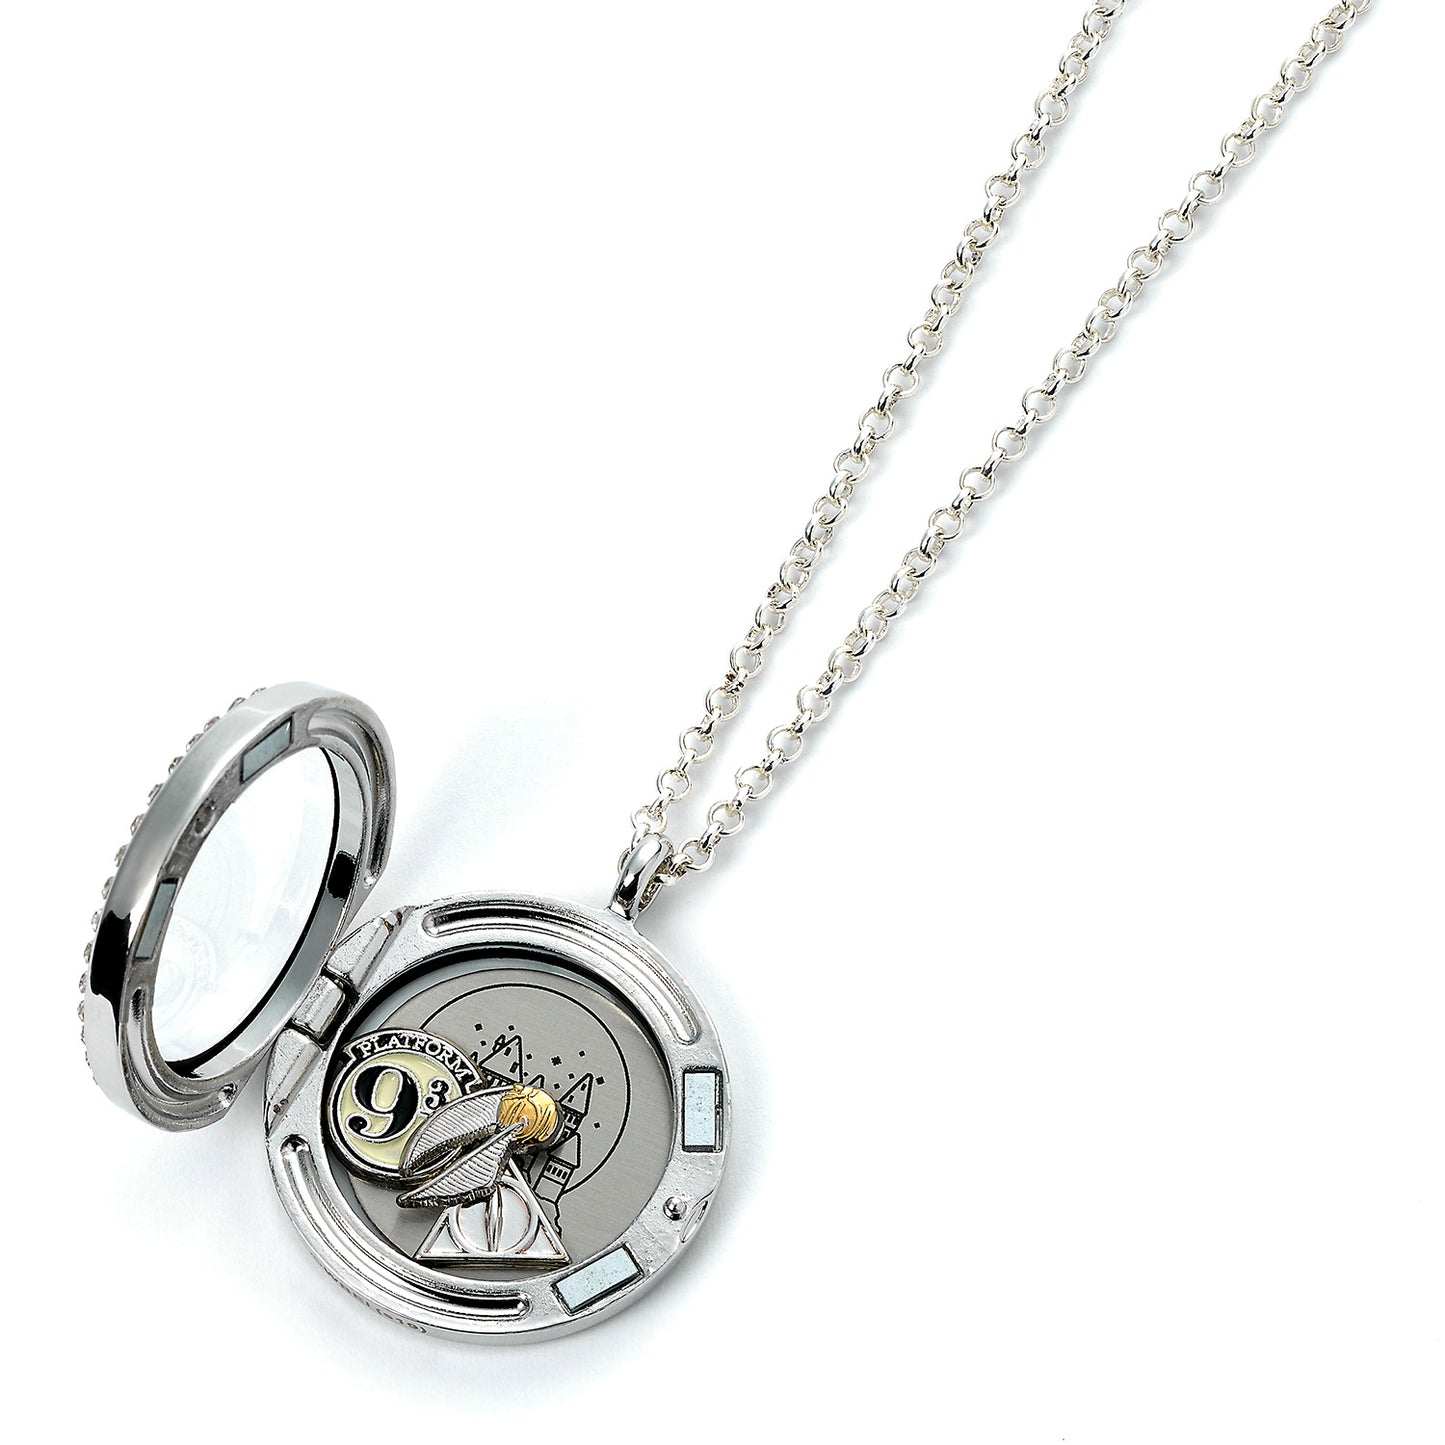 Harry Potter  Floating Charm Locket Necklace with 3 charms - Silver